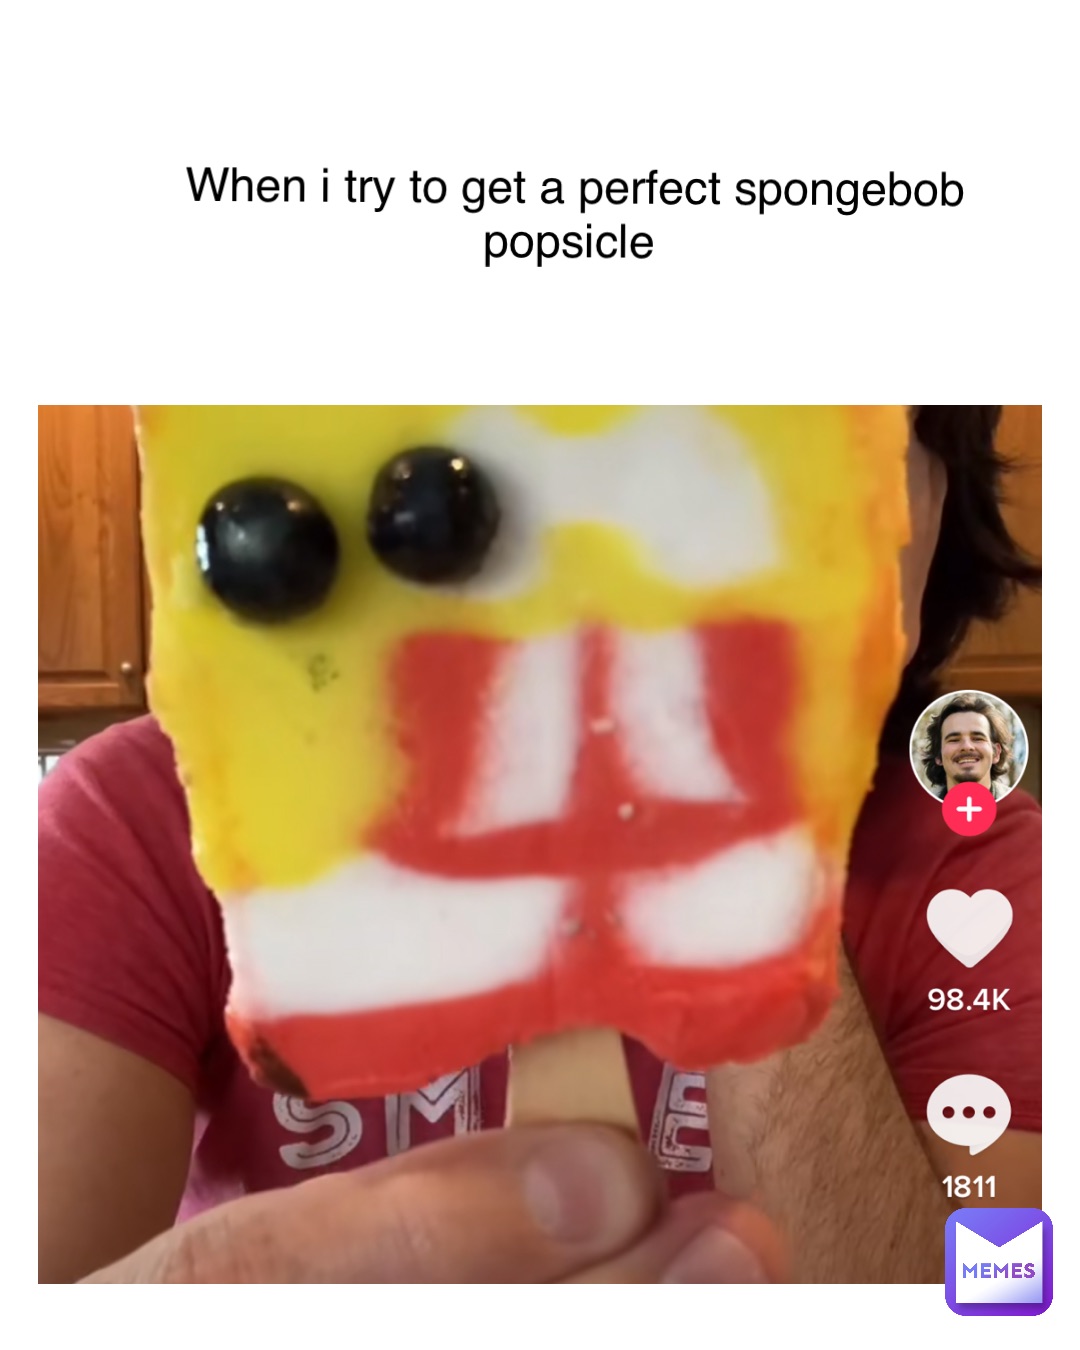 When I try to get a perfect spongebob popsicle